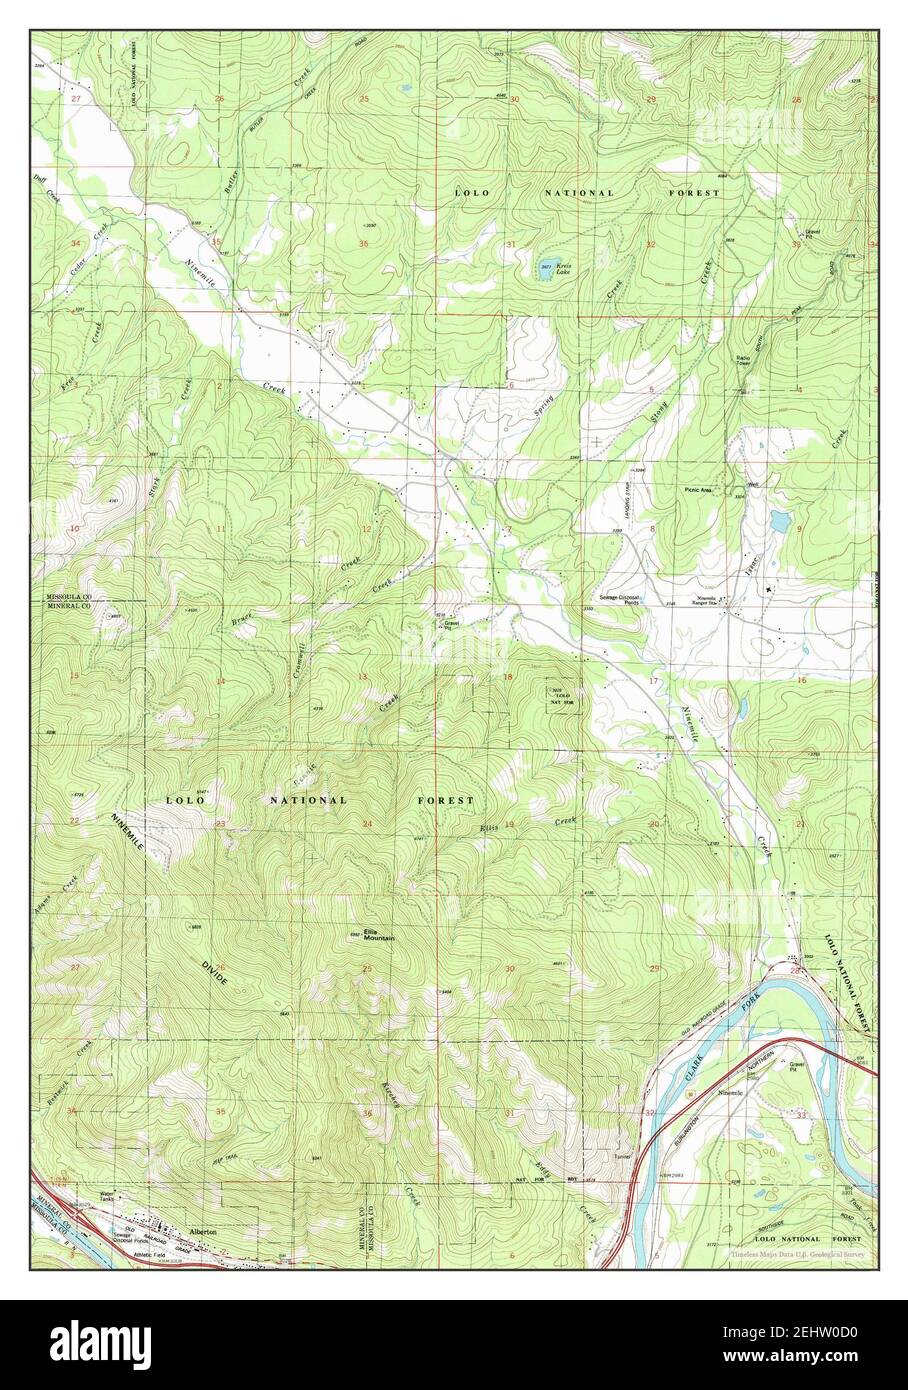 Alberton, Montana, map 1984, 1:24000, United States of America by Timeless Maps, data U.S. Geological Survey Stock Photo